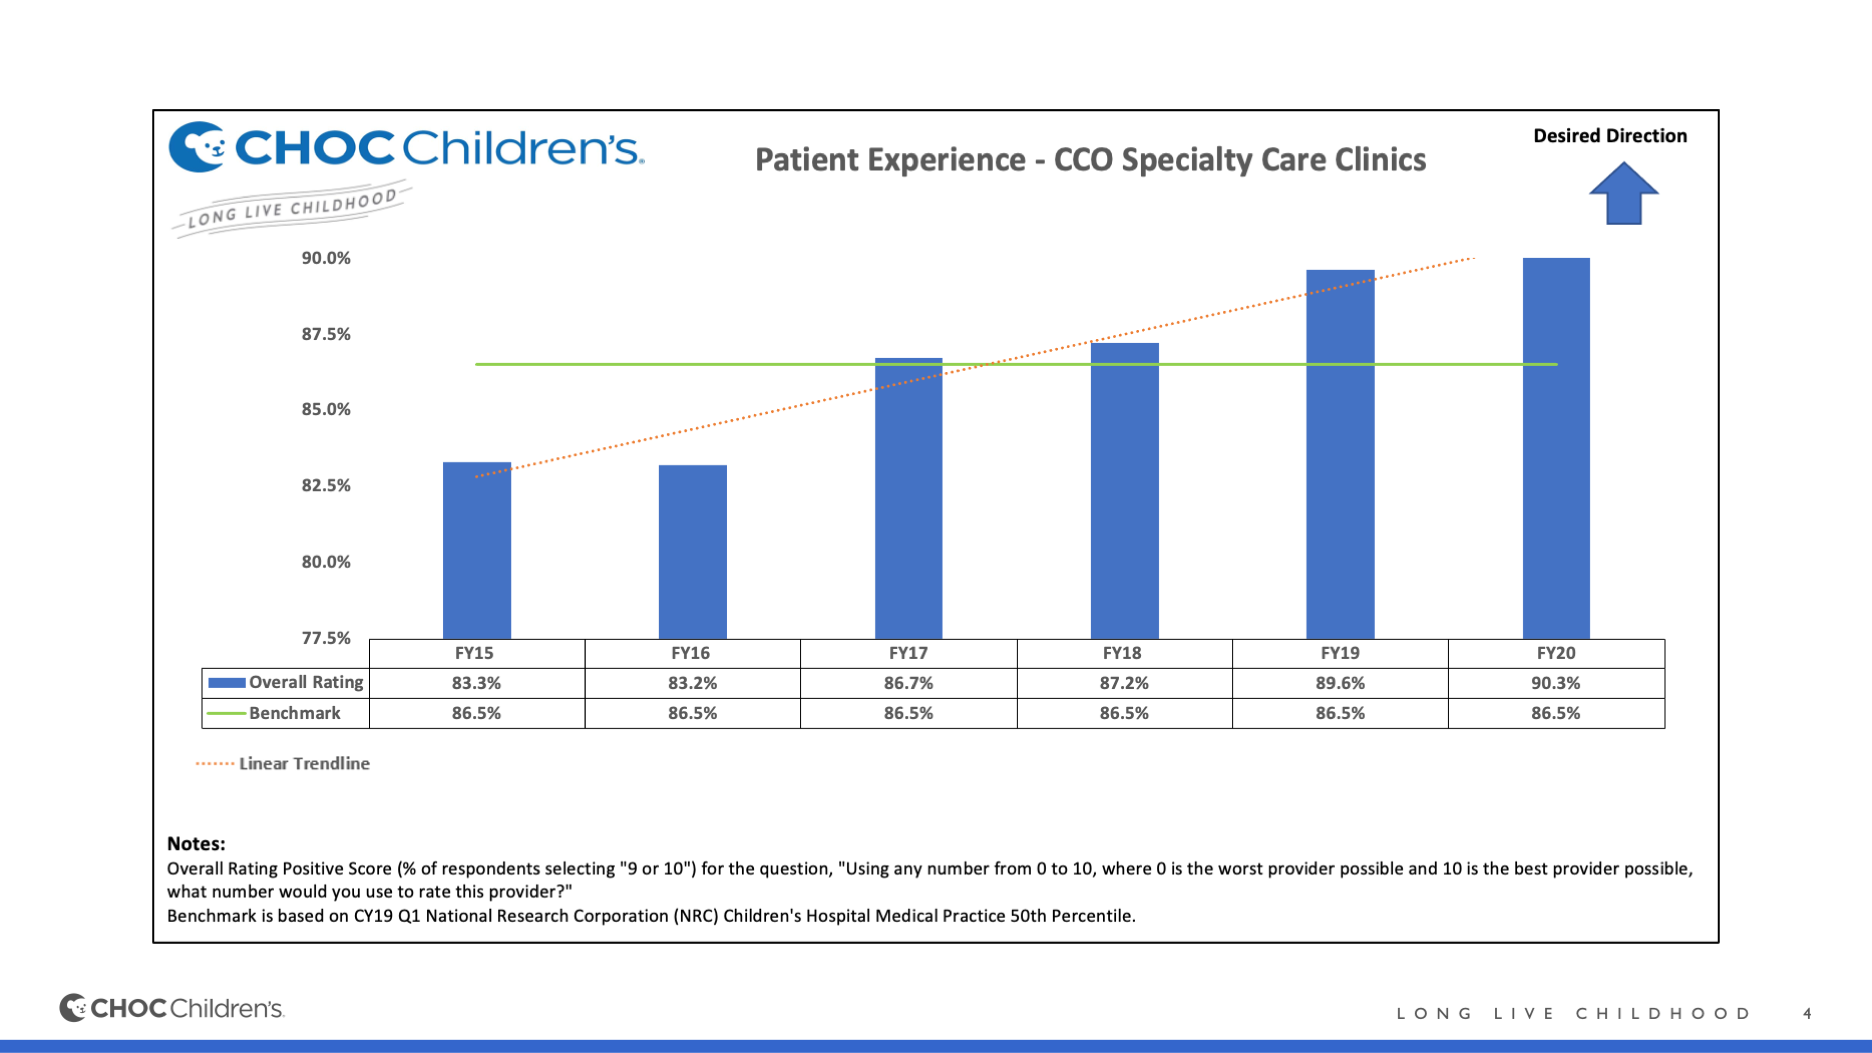 Patient Experience - CCO Specialty Care Clinics